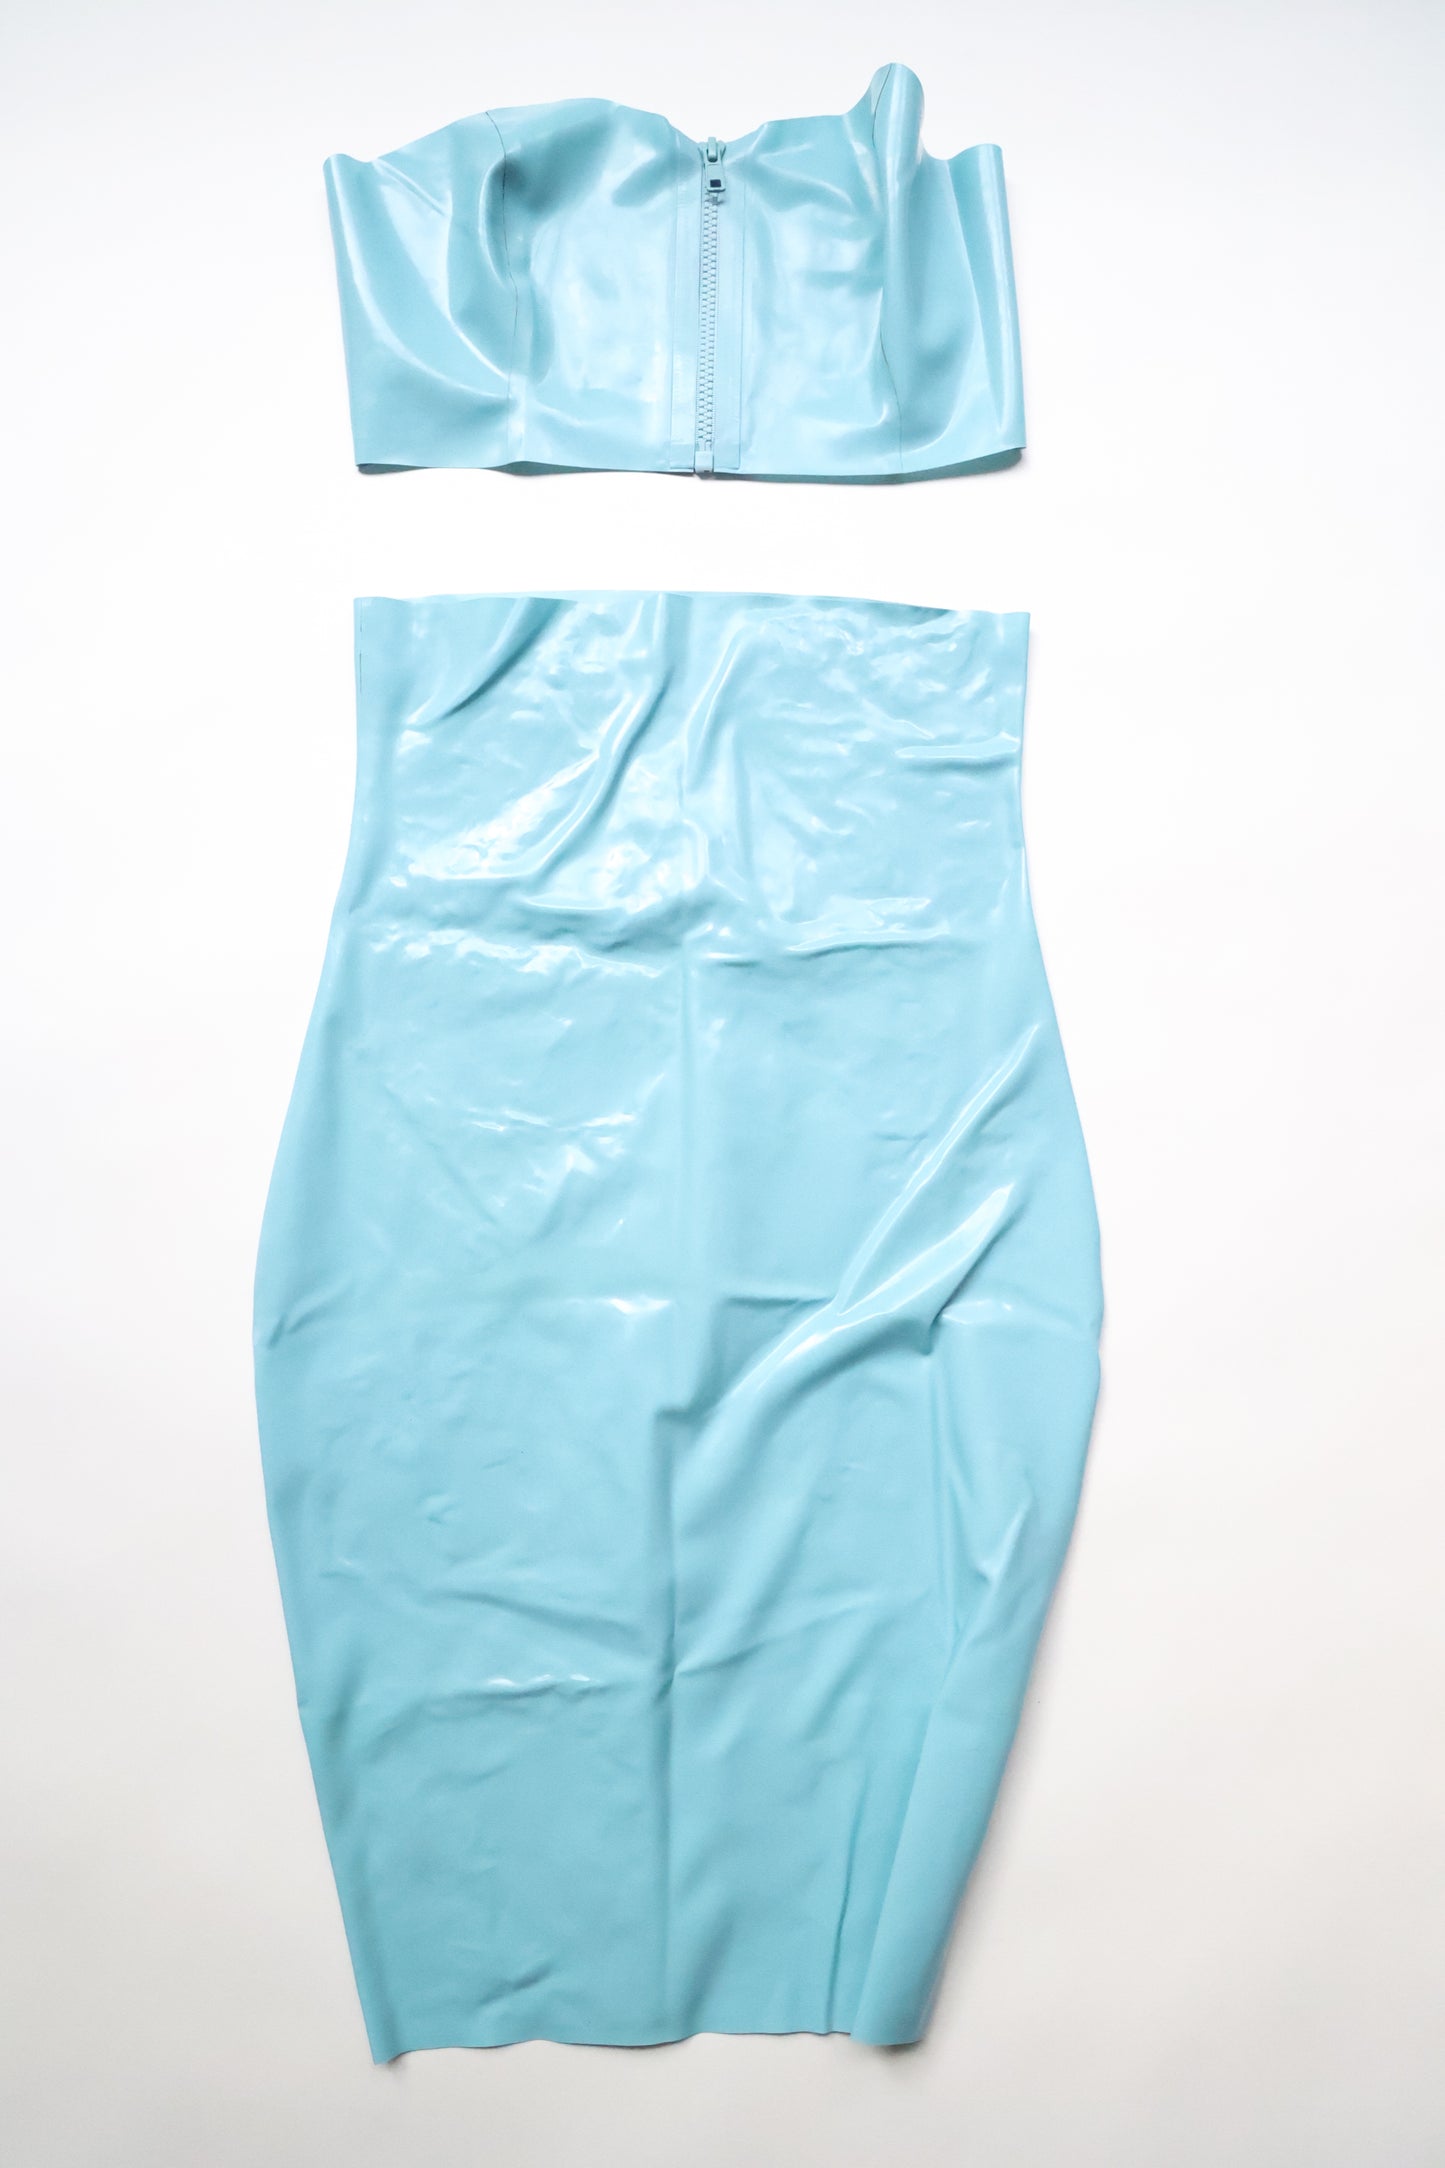 Latex Two Piece Skirt and Bandeau Tube Top Set - Women's Size S - Light Blue